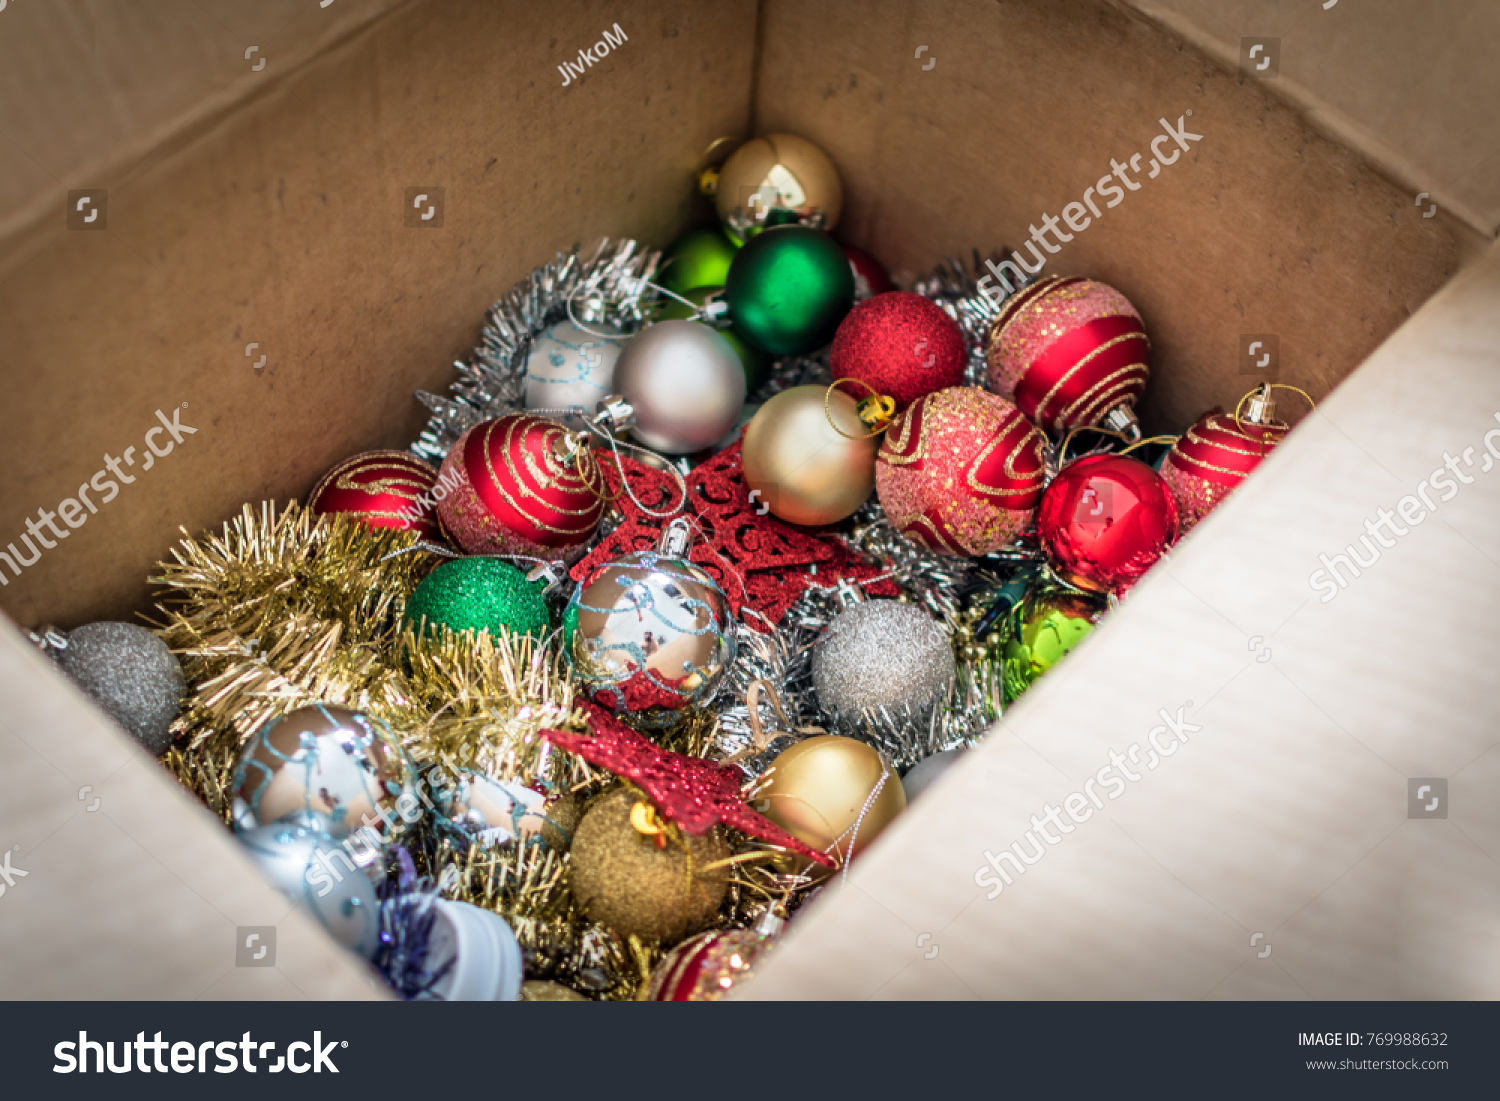 Christmas decorations in a box #769988632